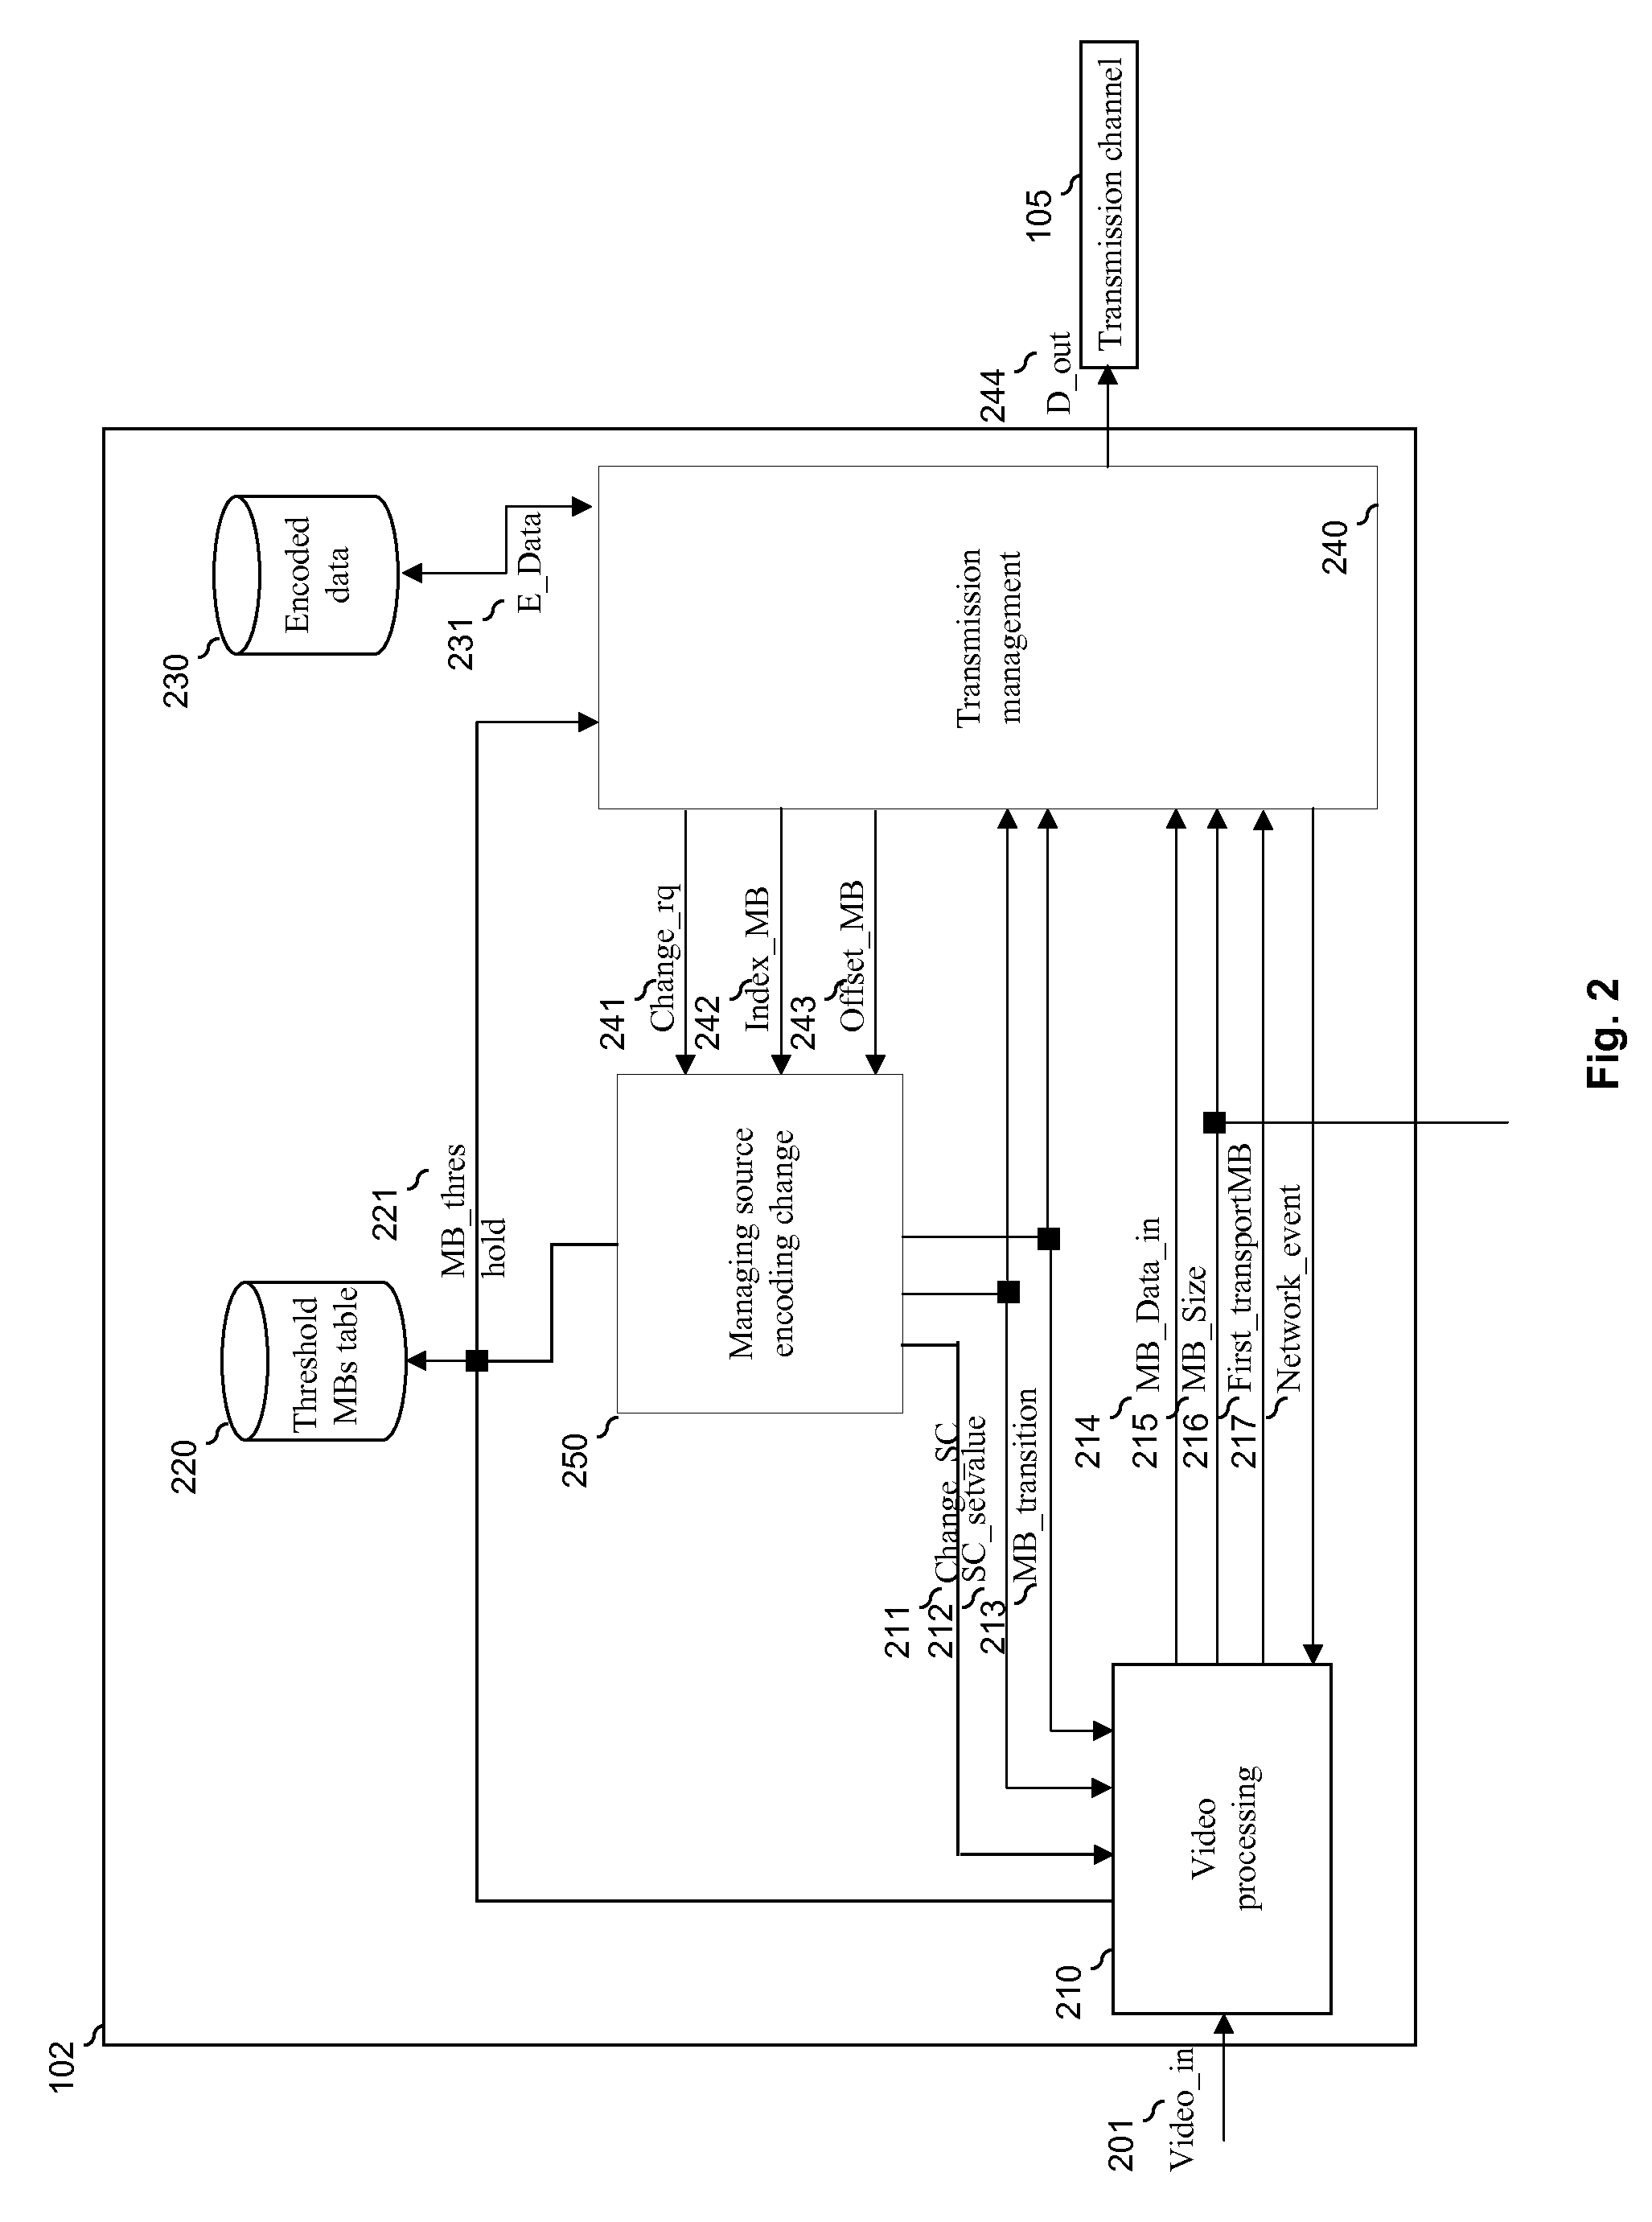 Method for managing a data transmission from a sender device, corresponding computer-readable storage medium and sender device